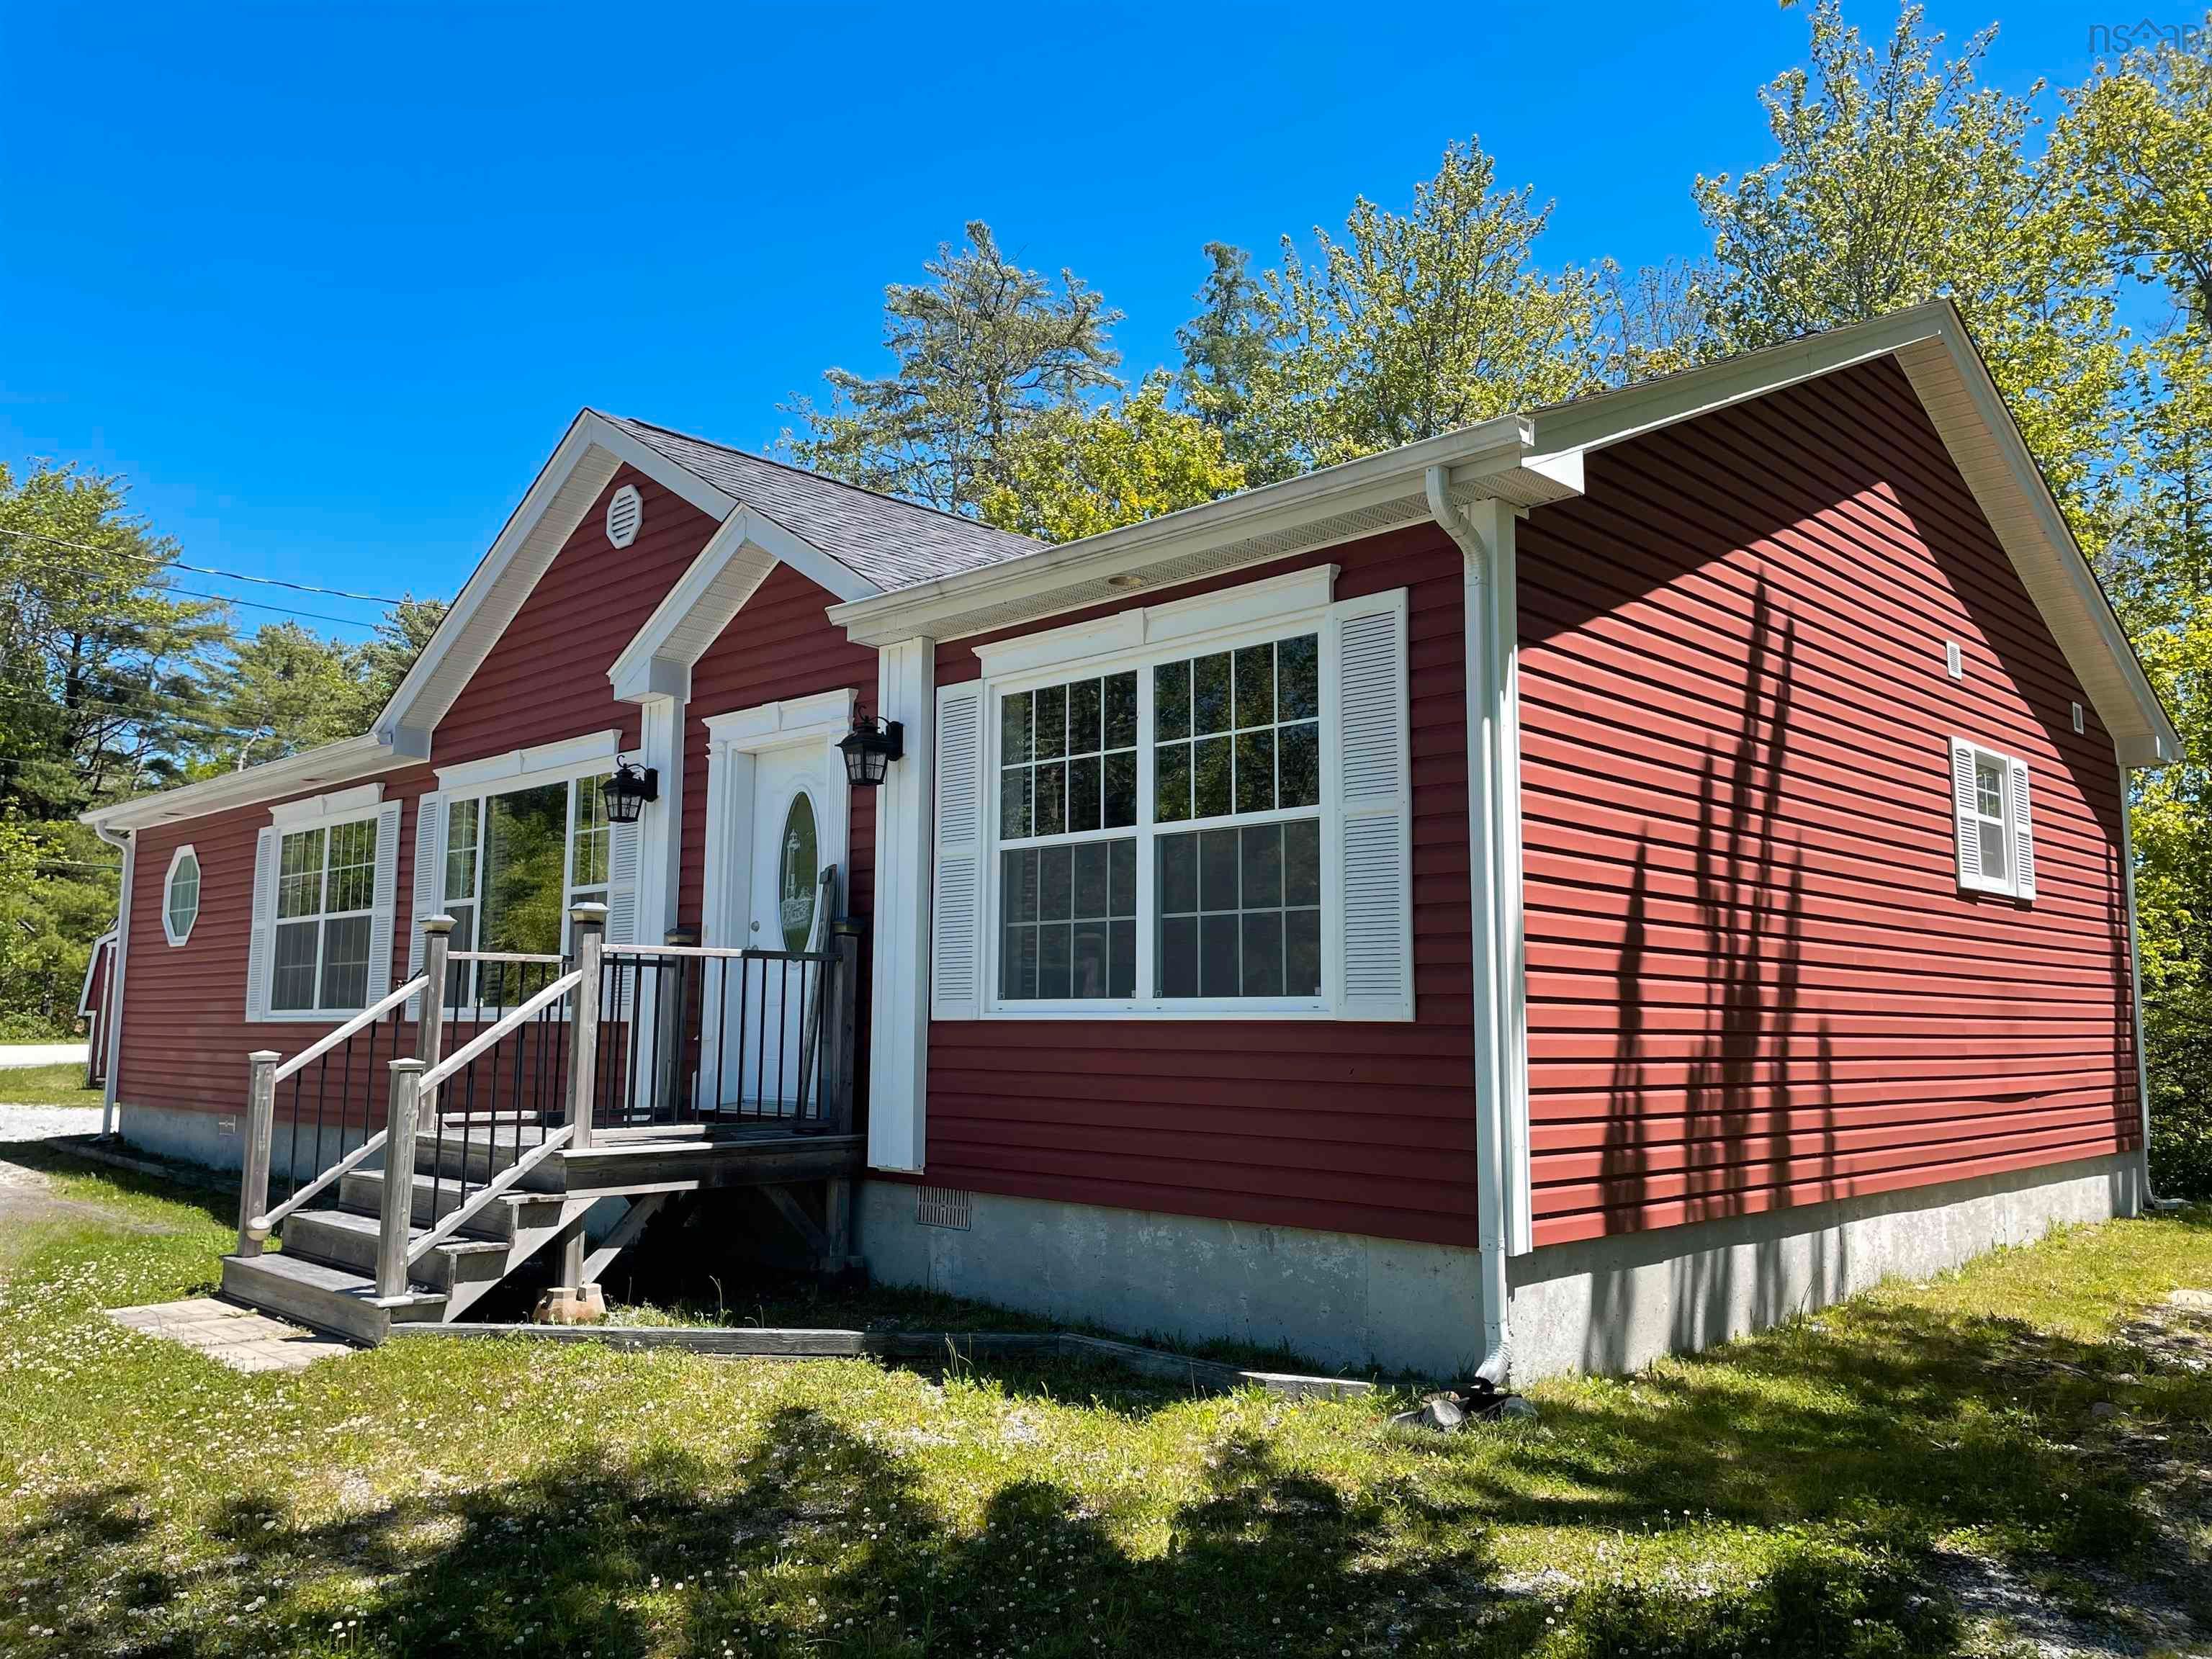 Main Photo: 1599 Lake Road in Shelburne: 407-Shelburne County Residential for sale (South Shore)  : MLS®# 202213524